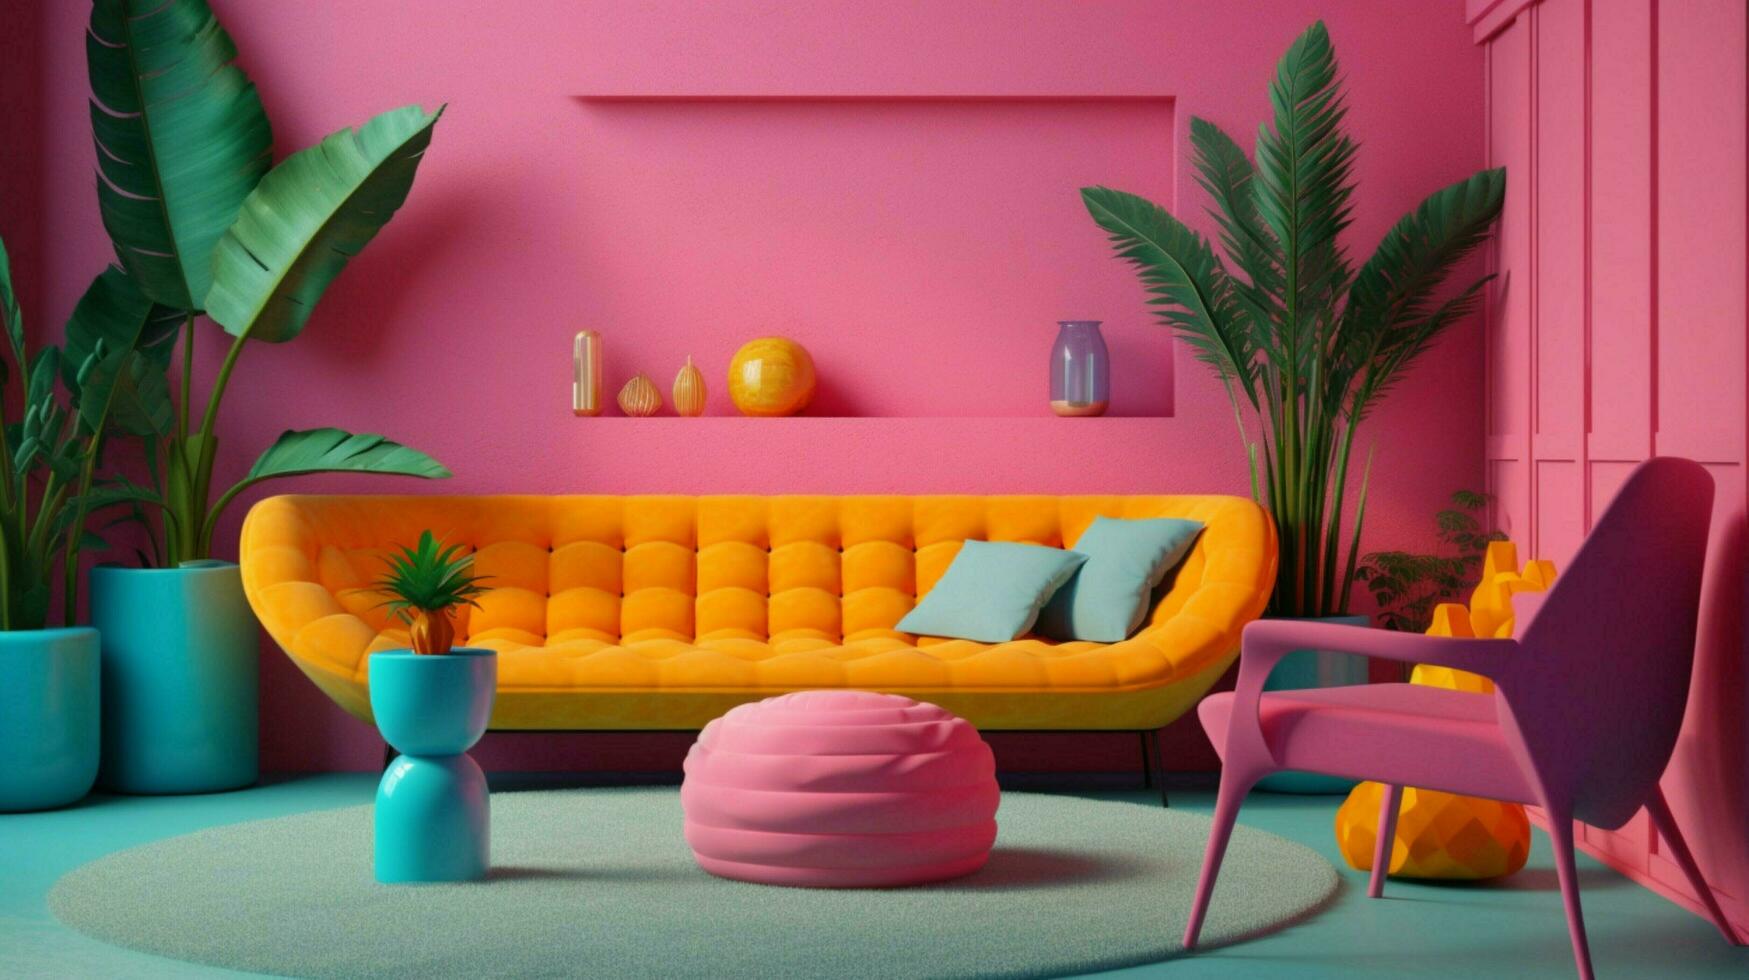 vibrant color palette with pastel and neon shades photo